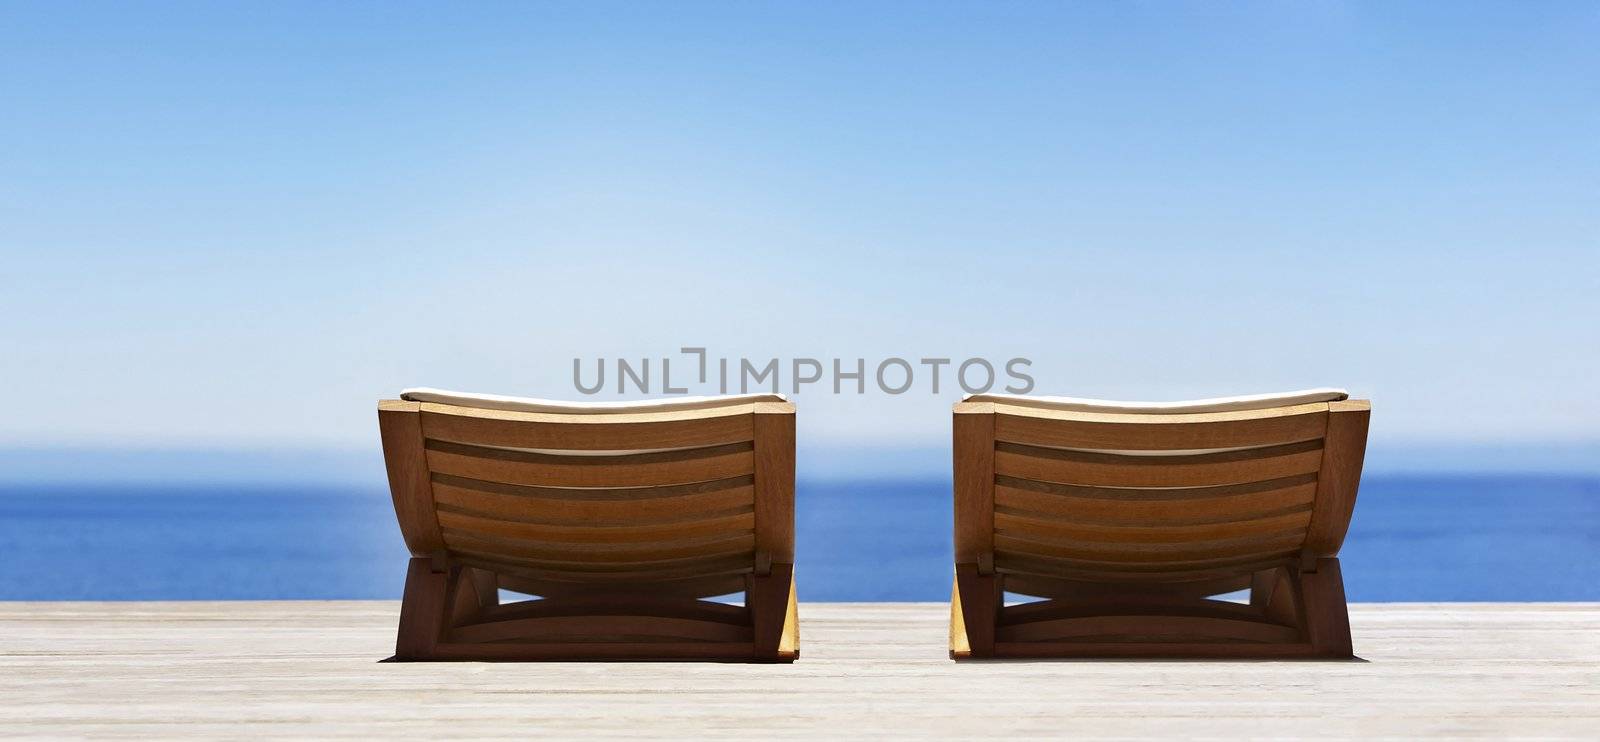 Beautiful beach with chaise lounge